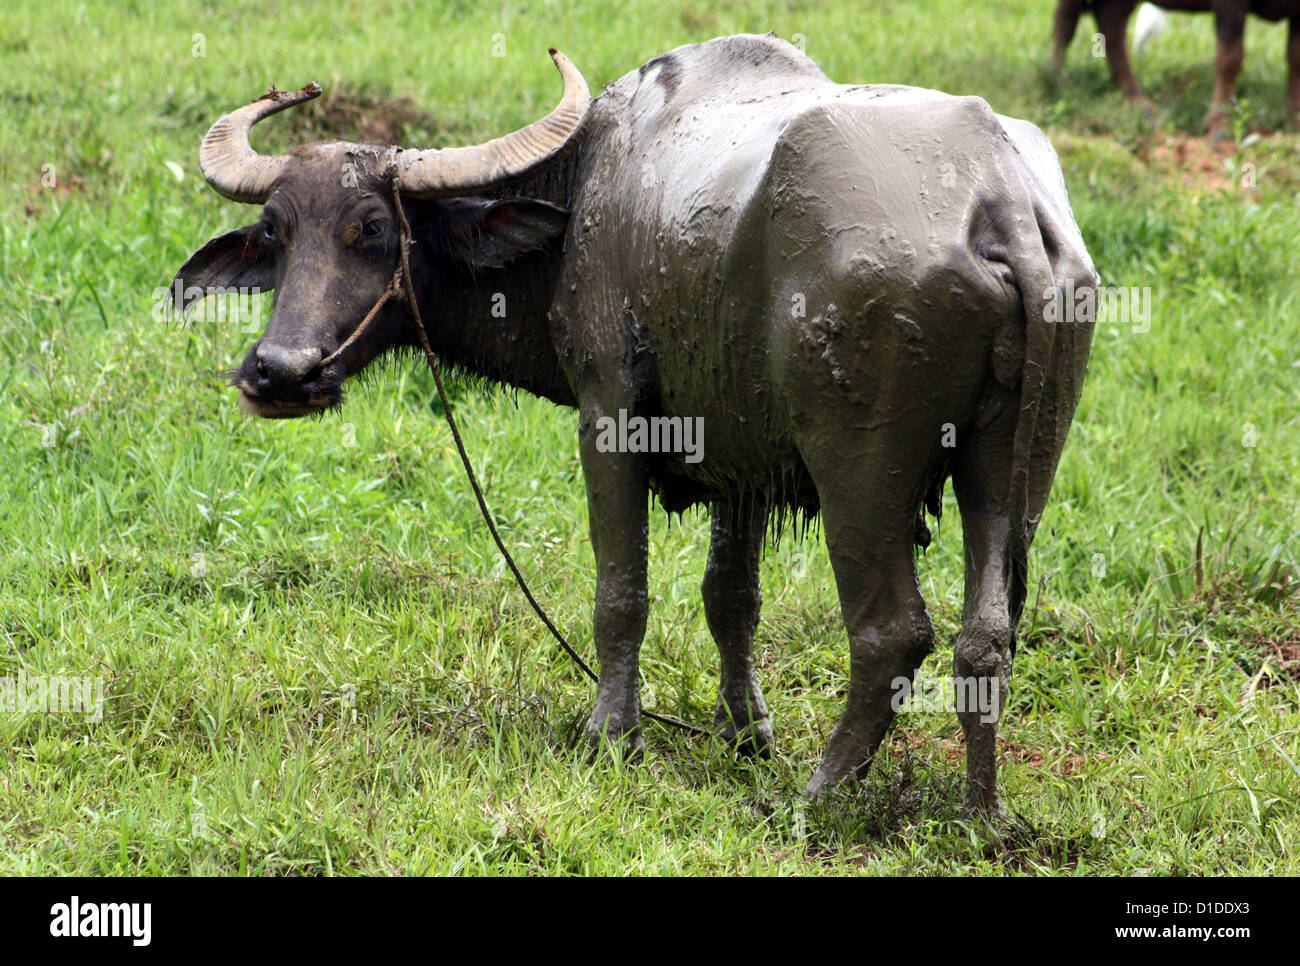 Carabao are typically associated with farmers, being the farm animal of